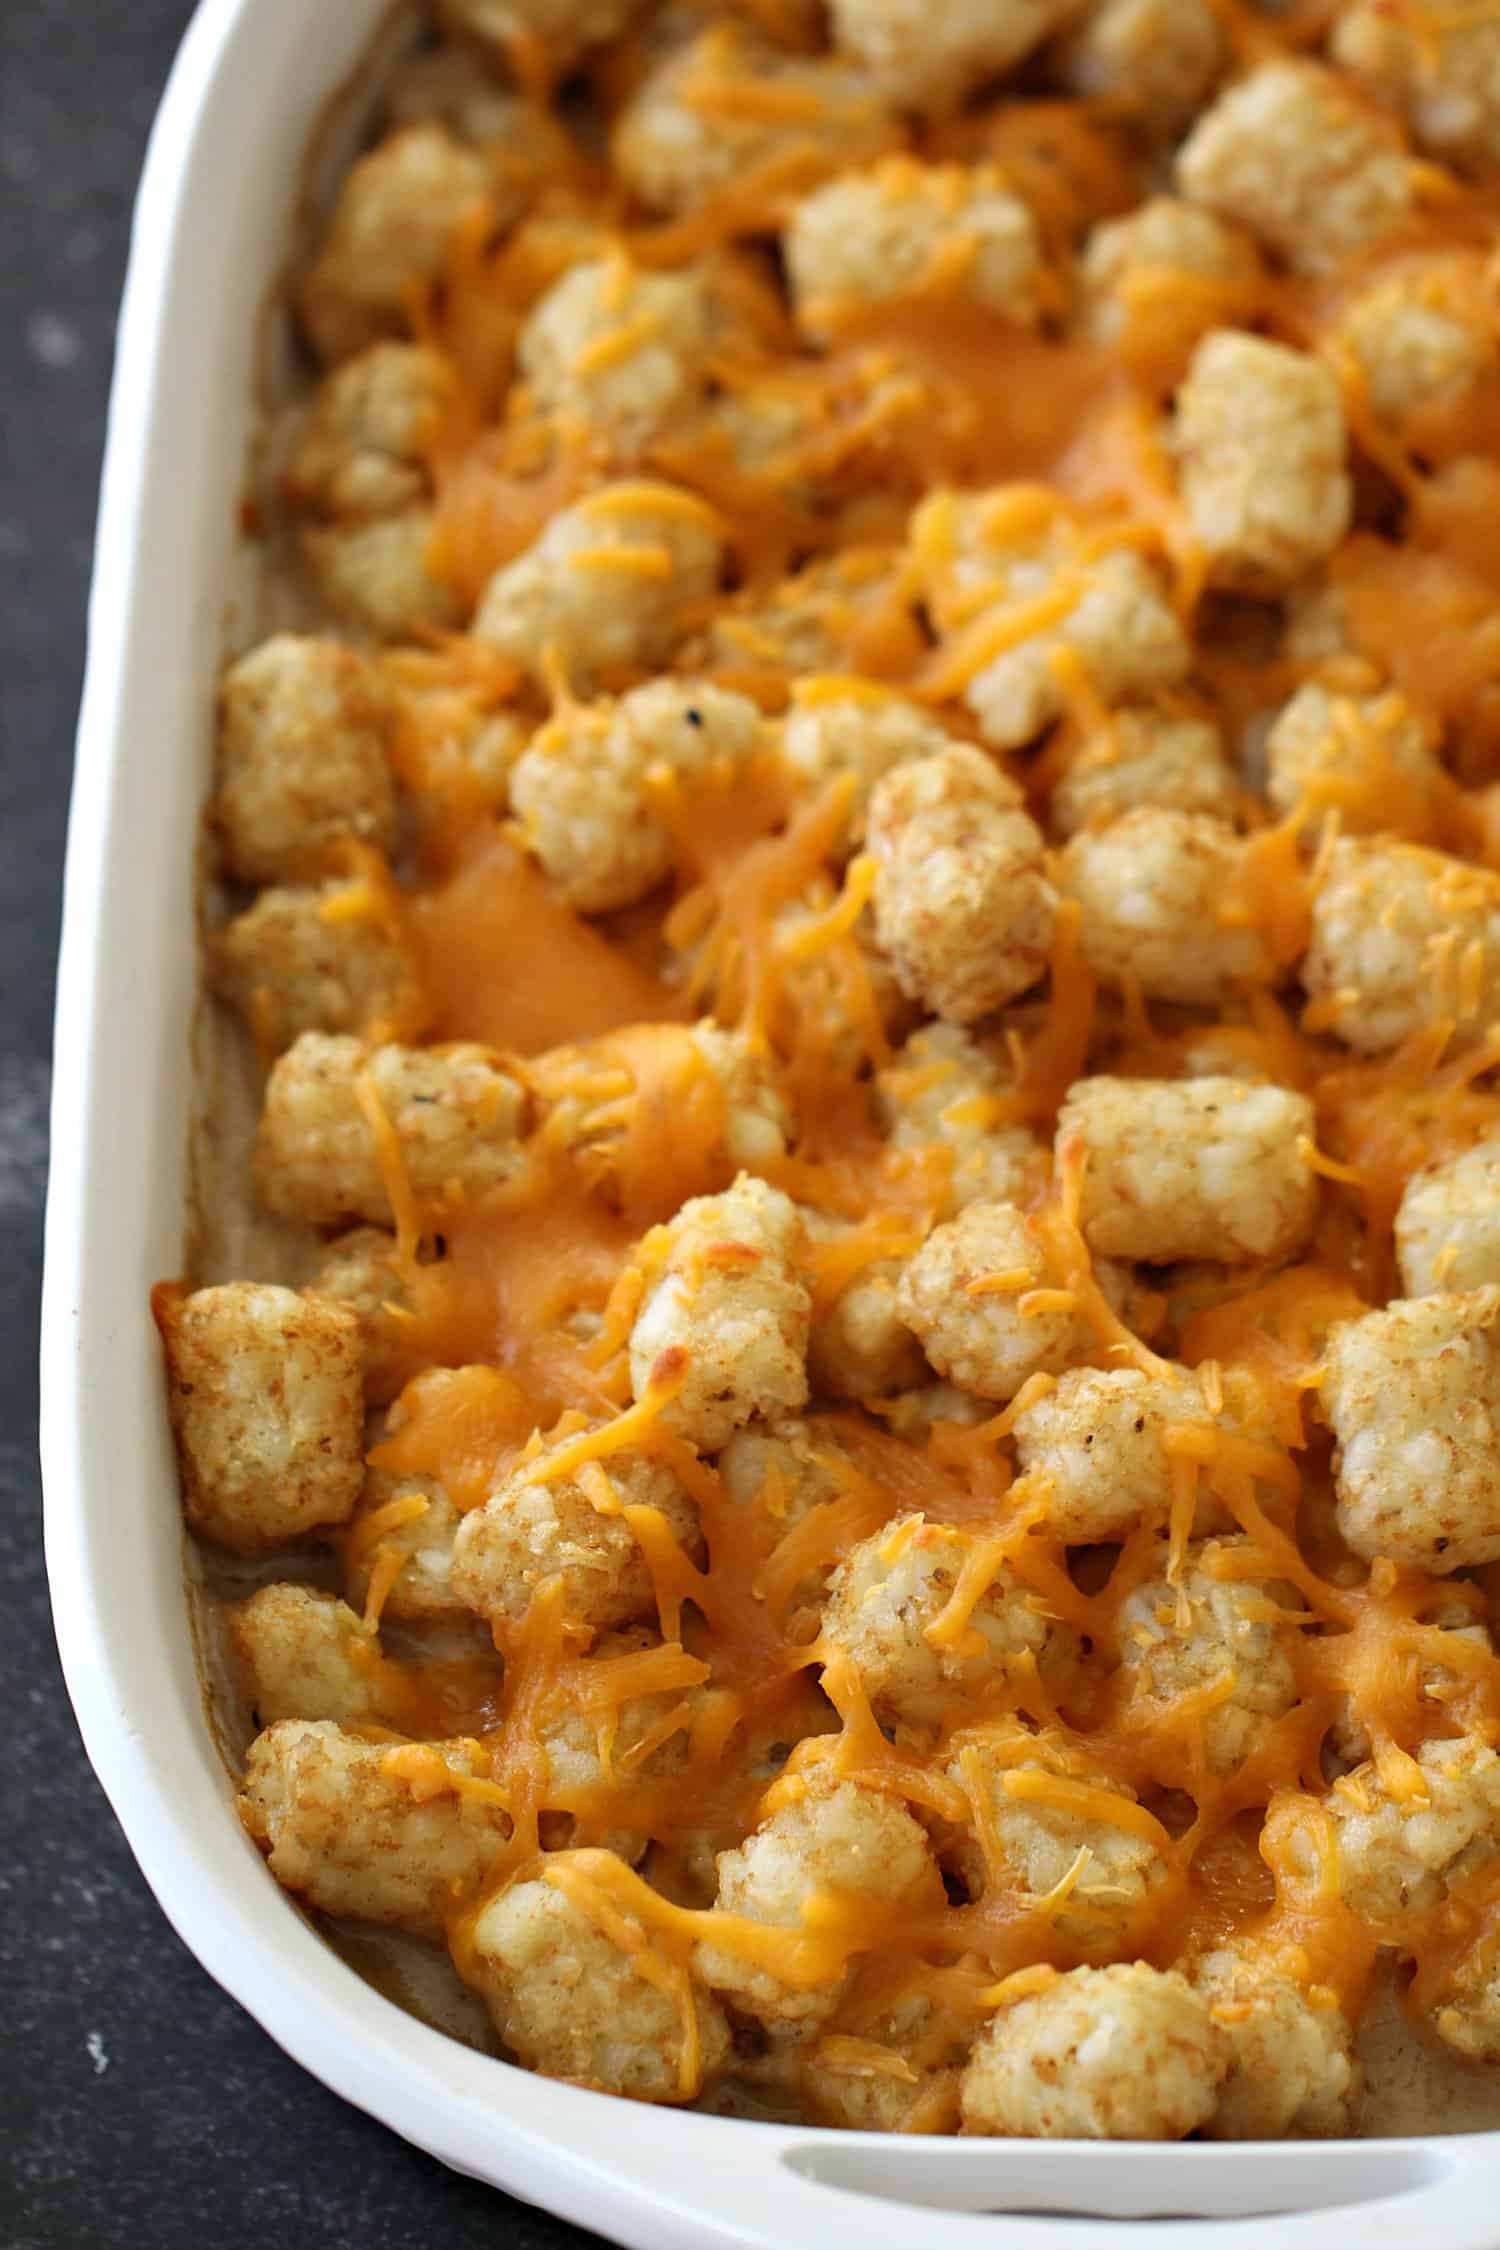 Cowboy Casserole Recipe (with Tater Tots)